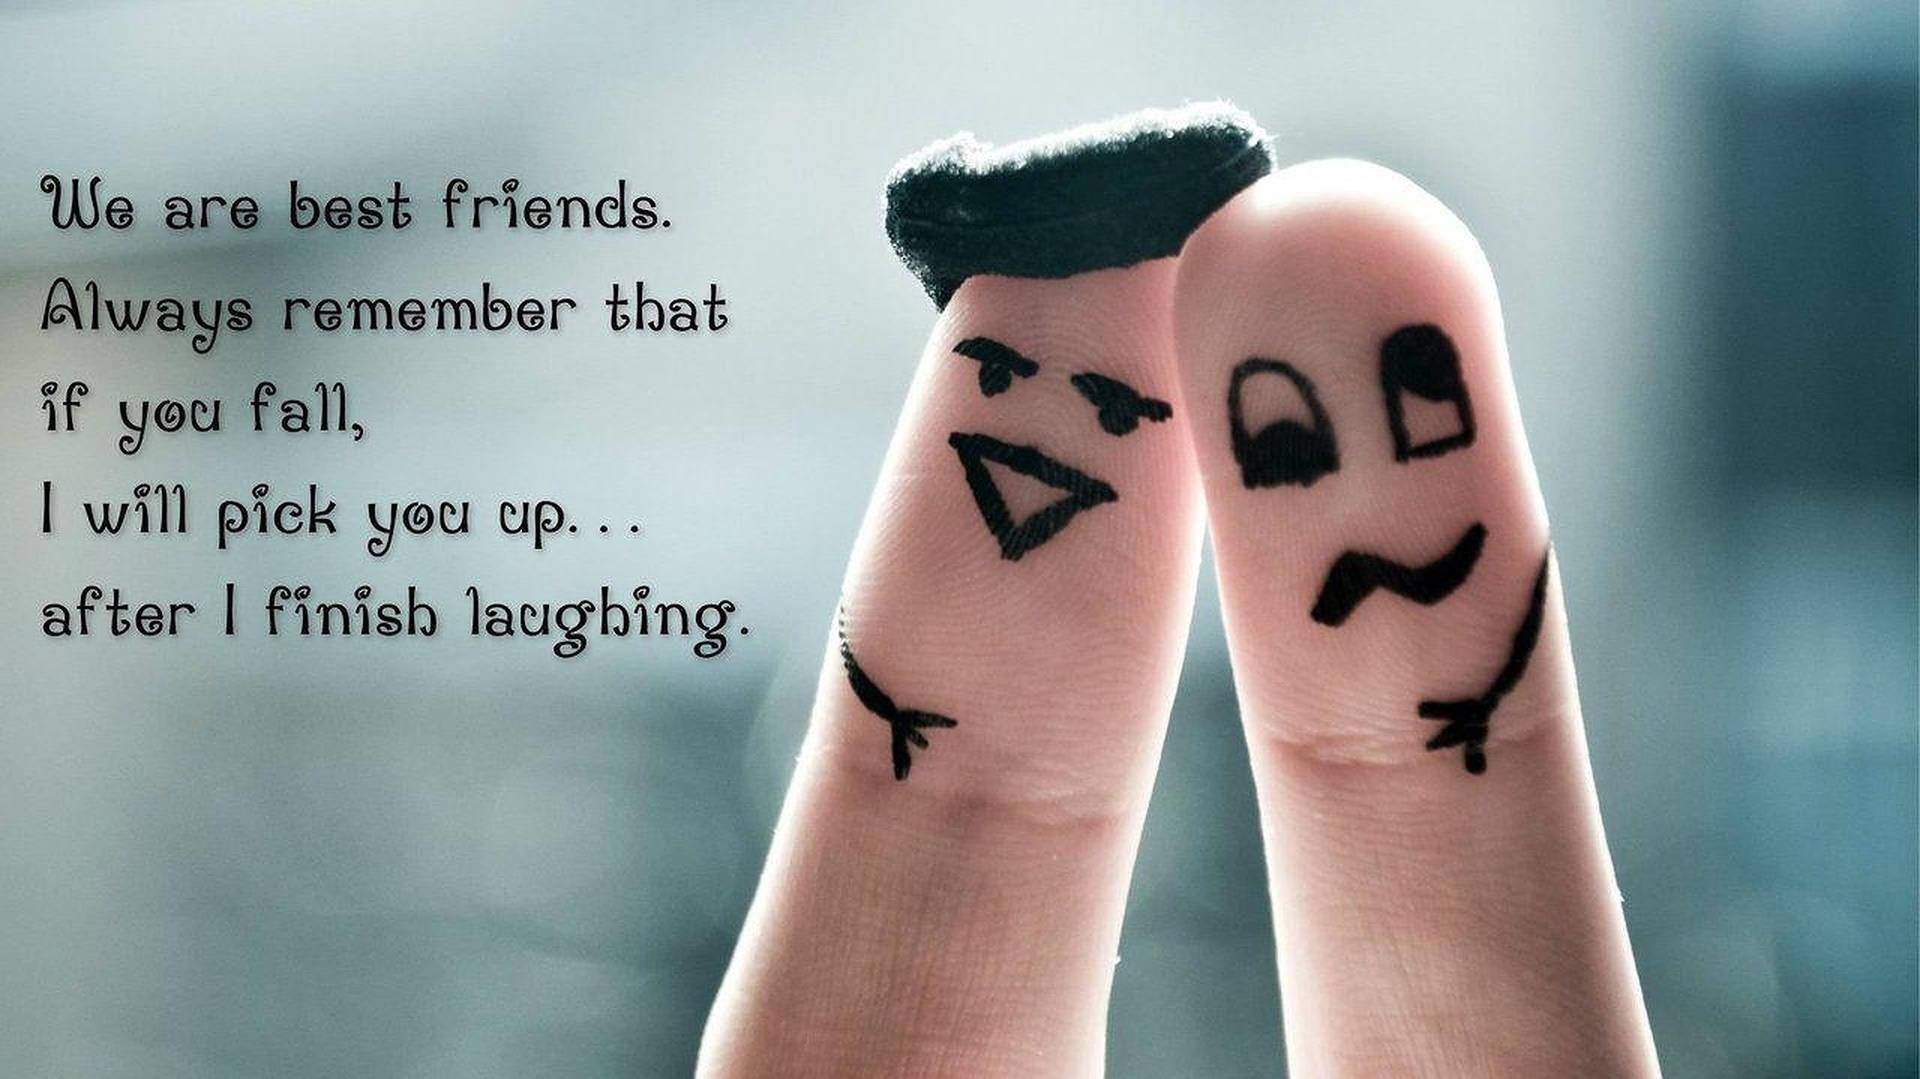 Friendship Quotes With Fingers Wallpaper